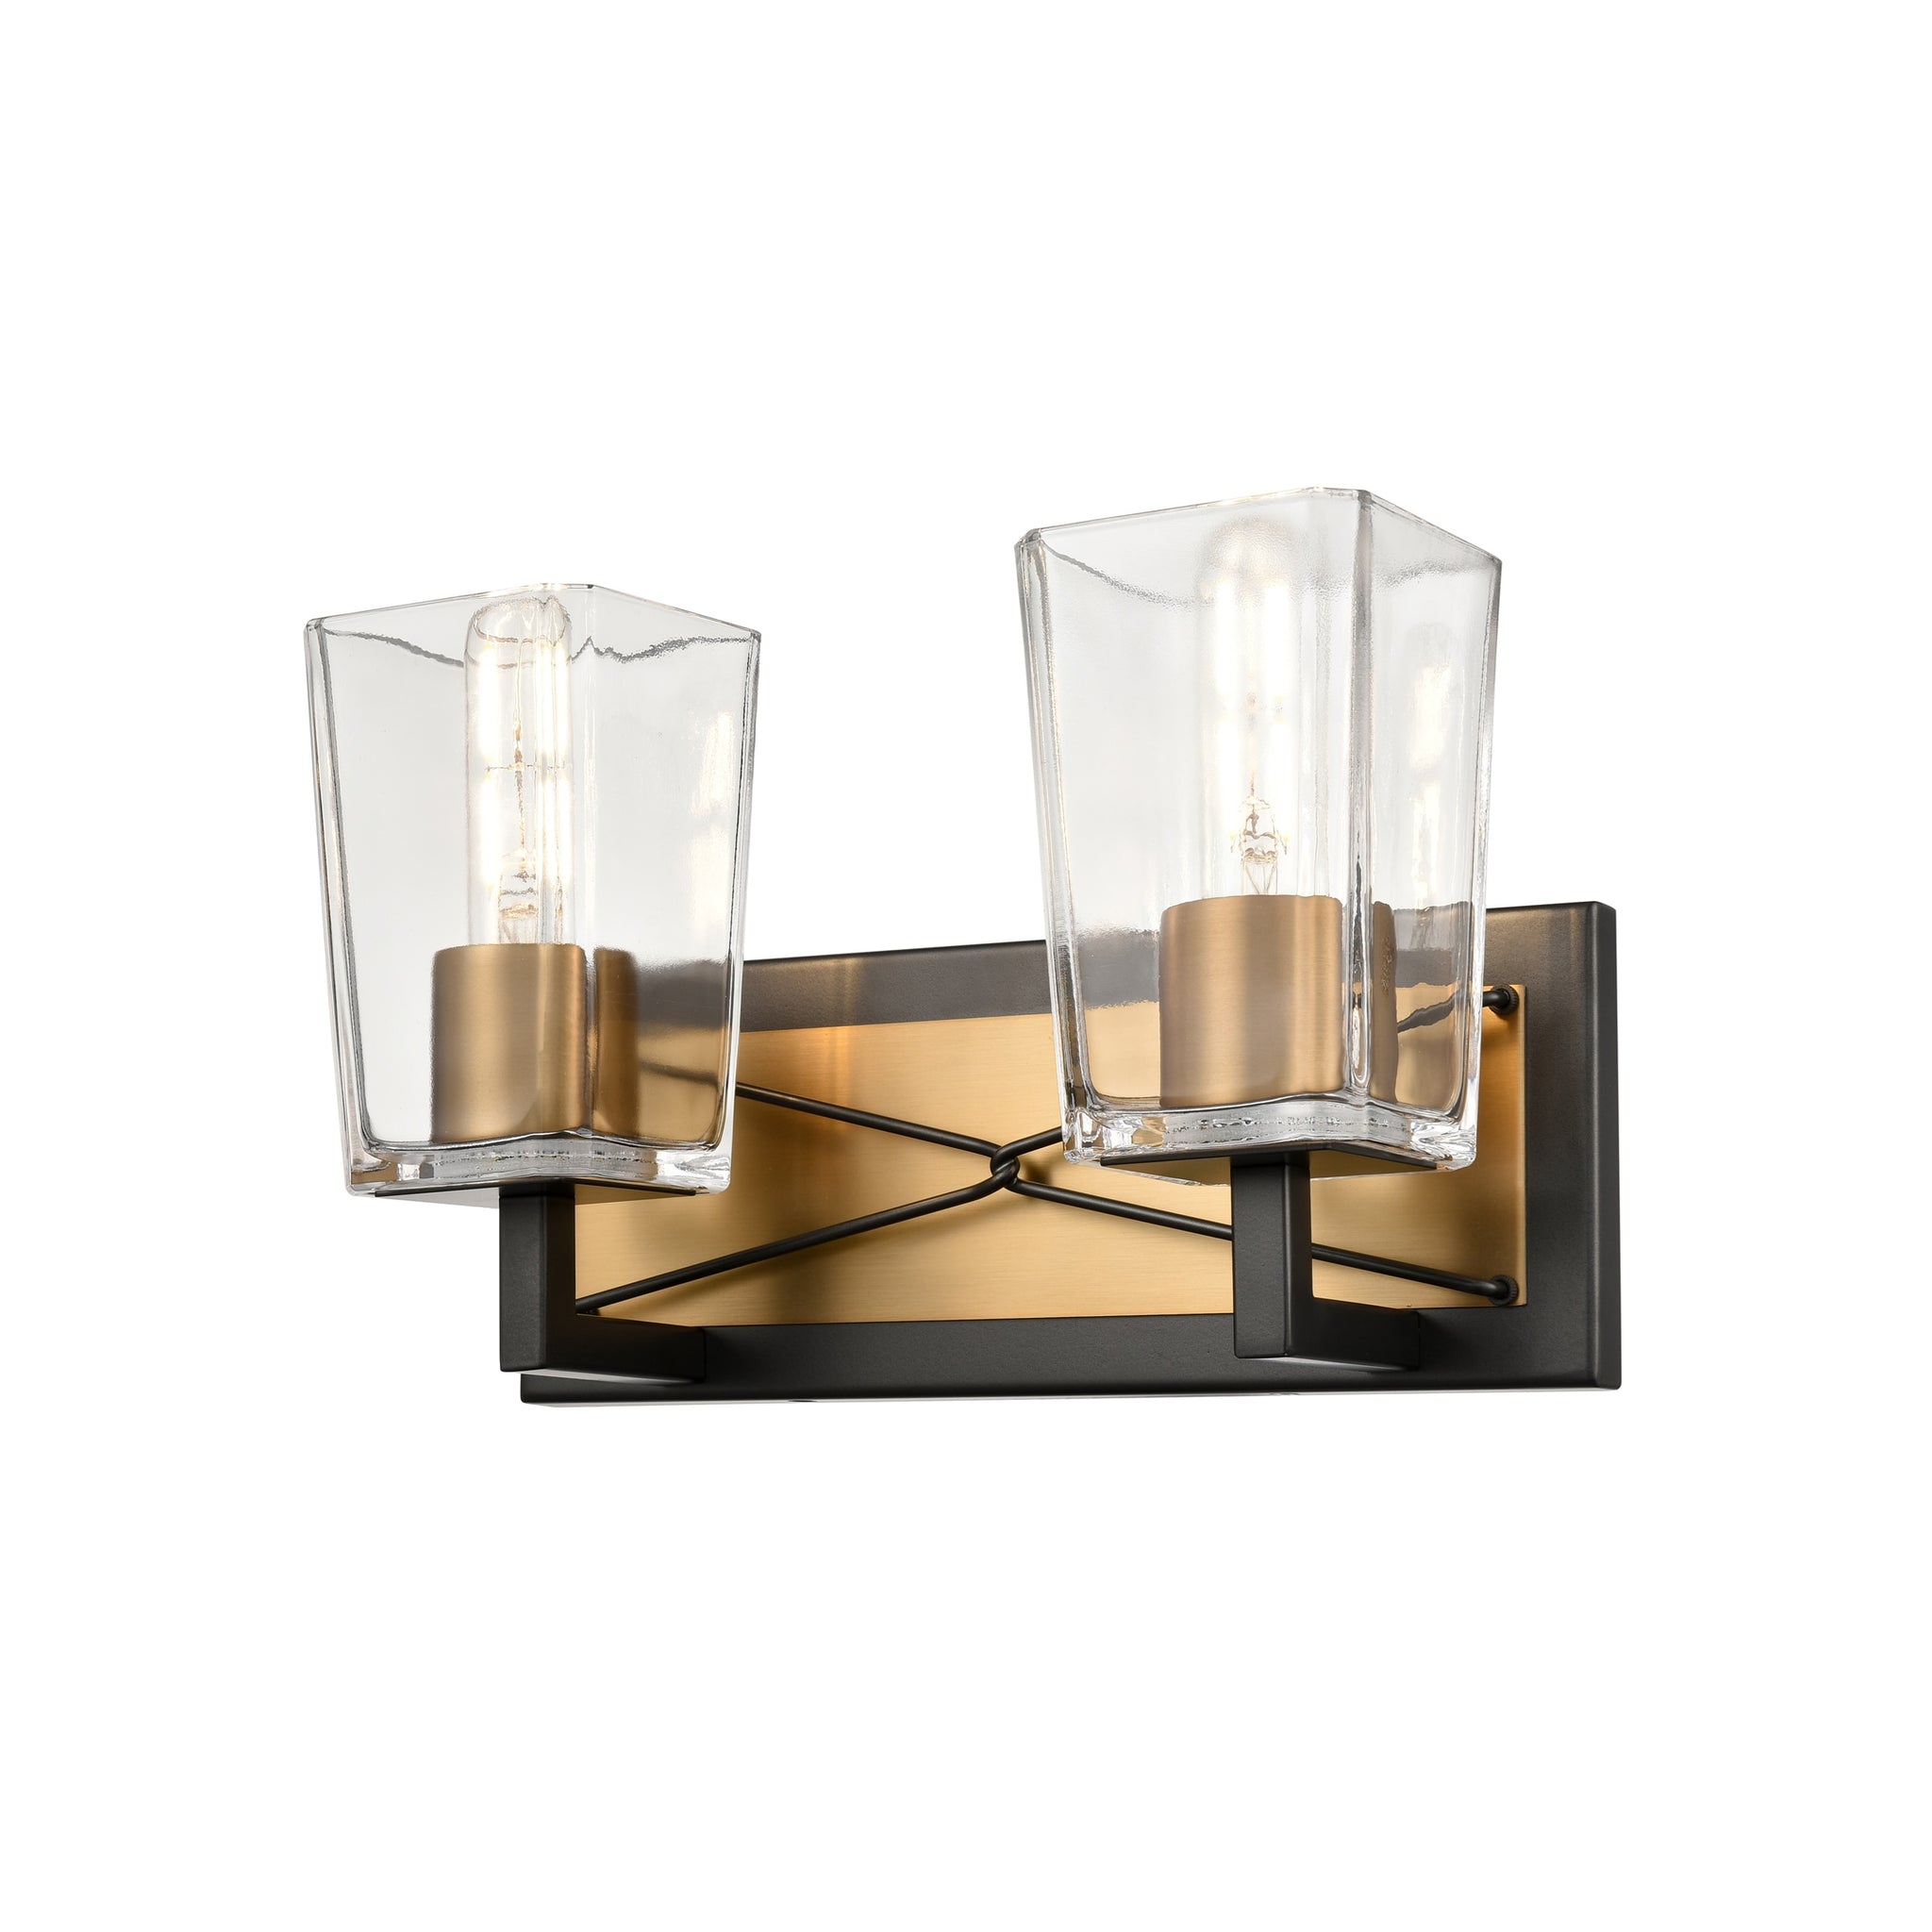 Riverdale Vanity Light Brass and Graphite with Clear Glass